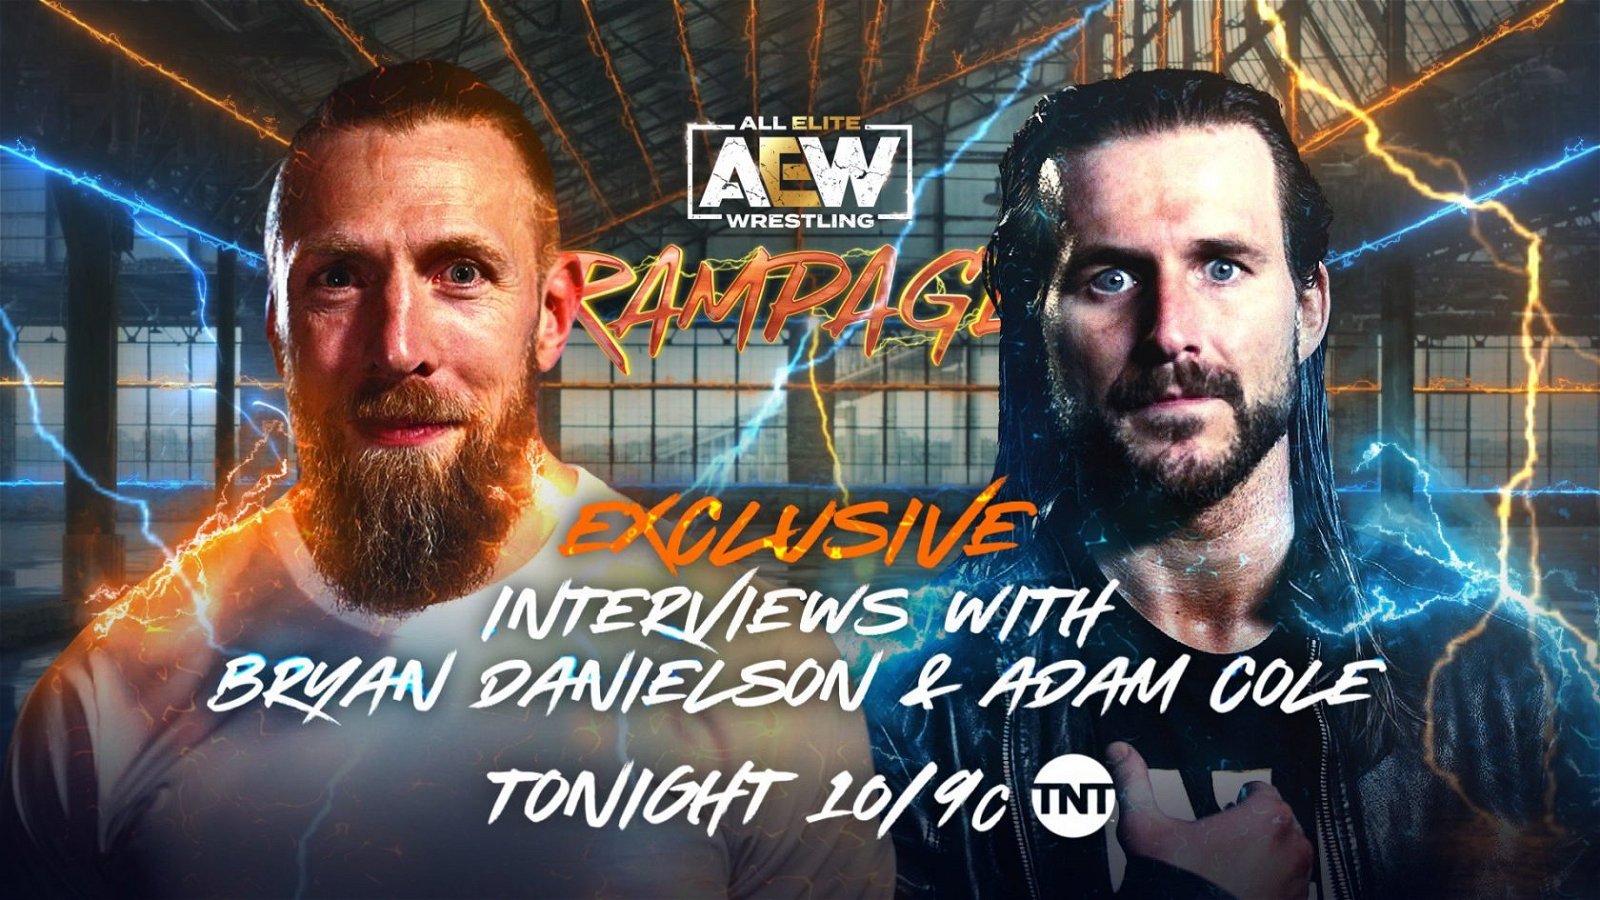 Bryan Danielson & Adam Cole Interviews Announced For Rampage